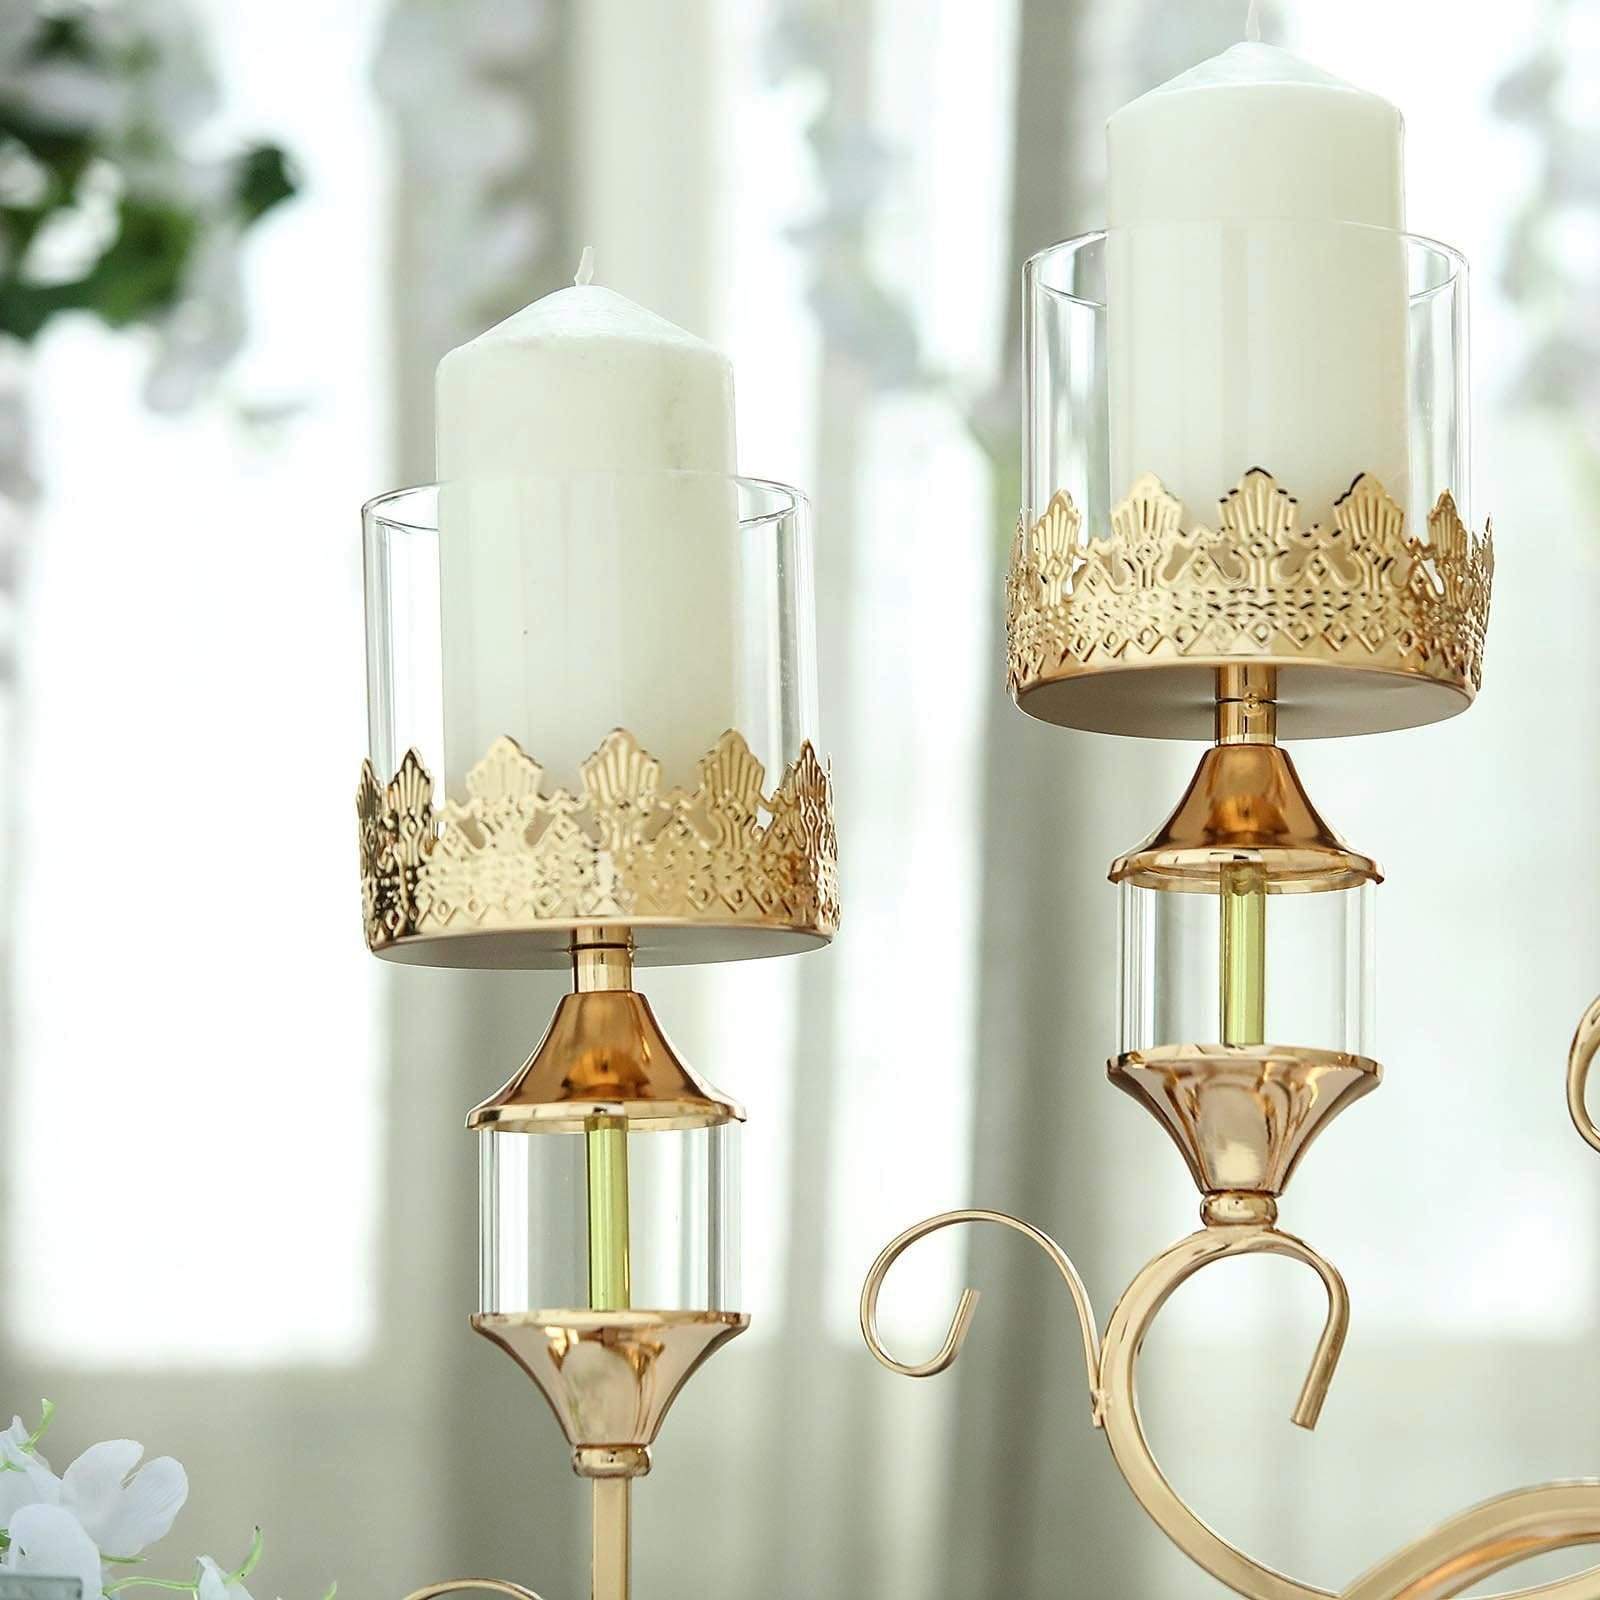 Gold 18 in tall Candelabra Hurricane Candle Holder Centerpiece with Glass